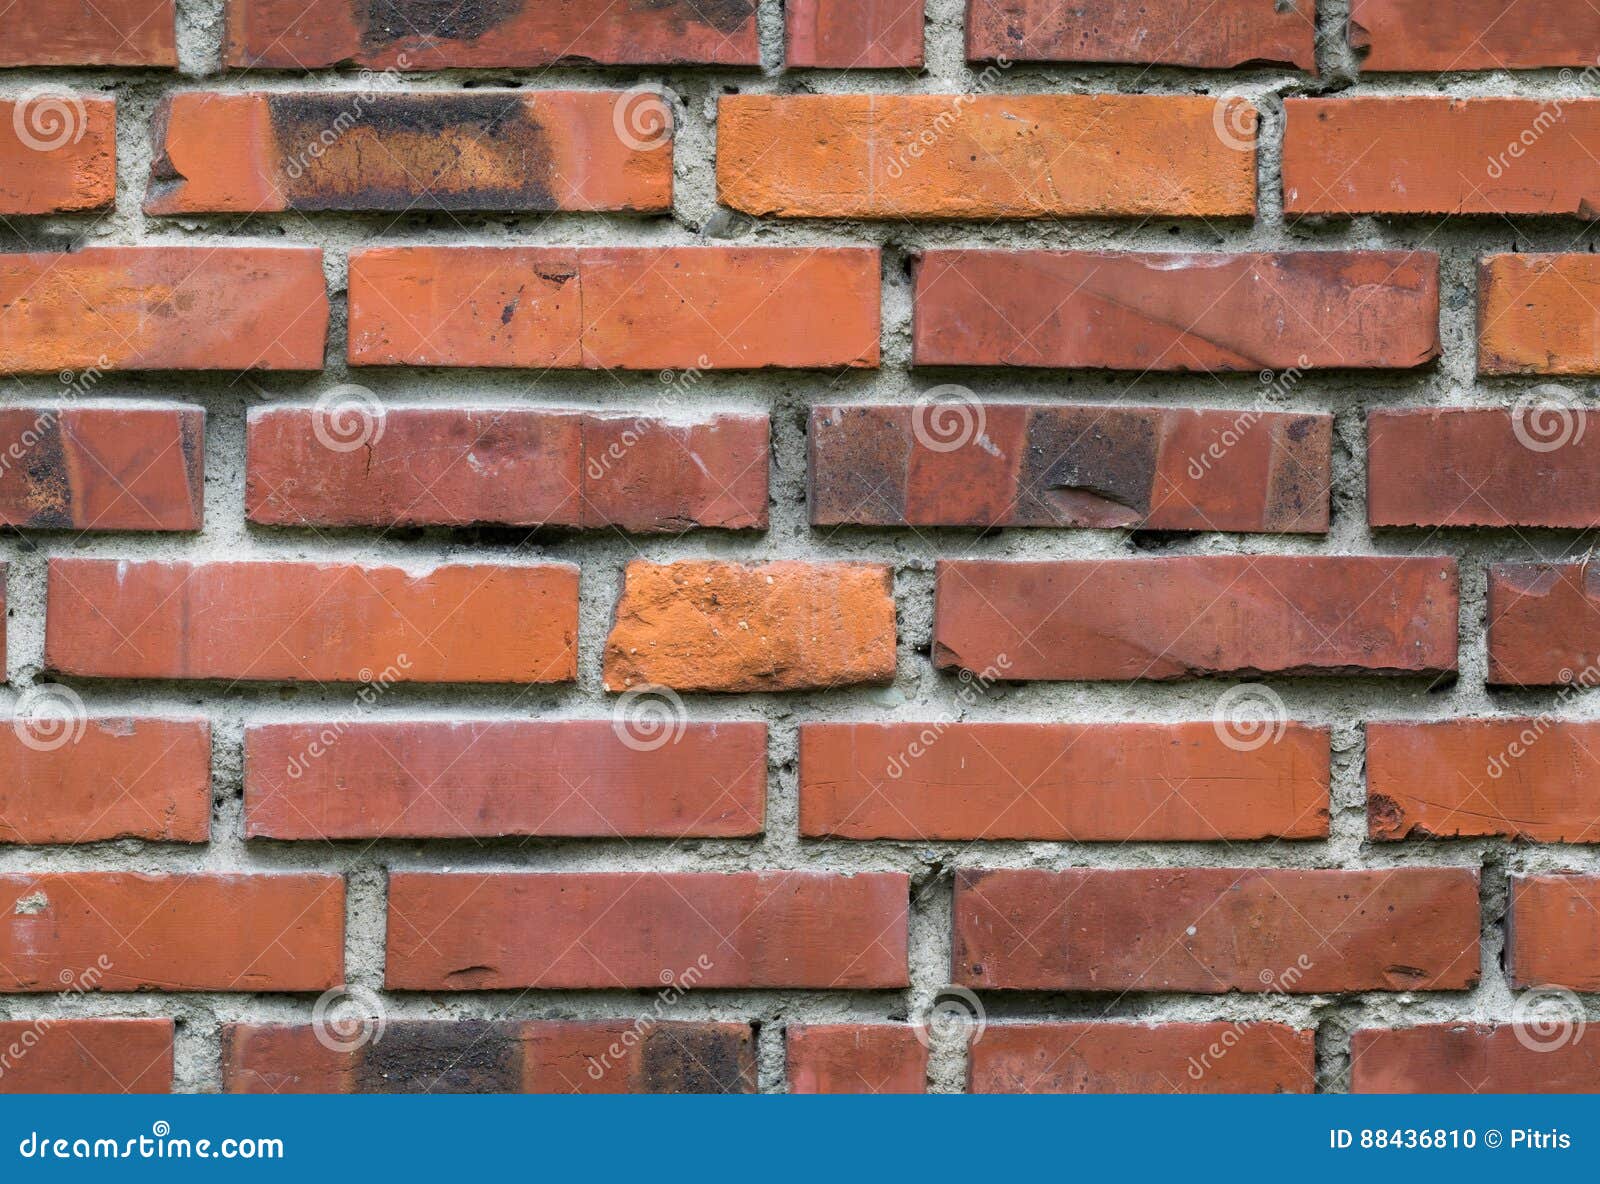 red brick wall texture, seamlessly tileable background